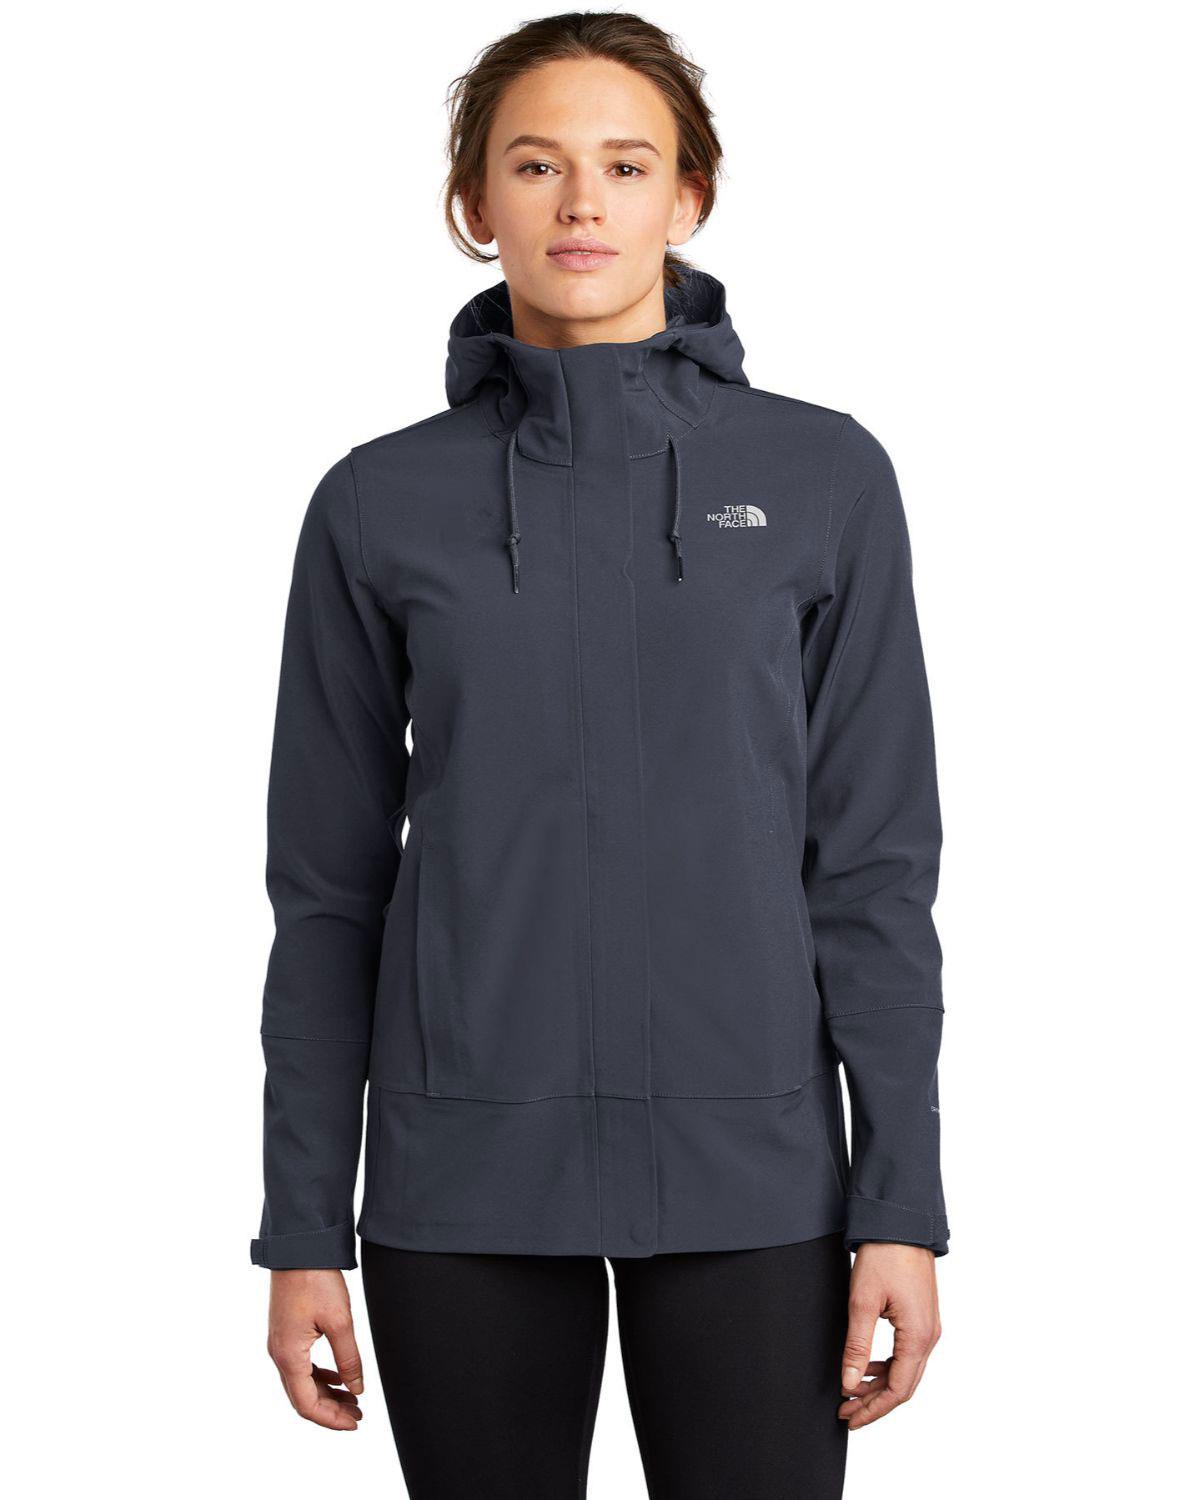 Size Chart for The North Face NF0A47FJ Ladies Apex DryVent Jacket ...